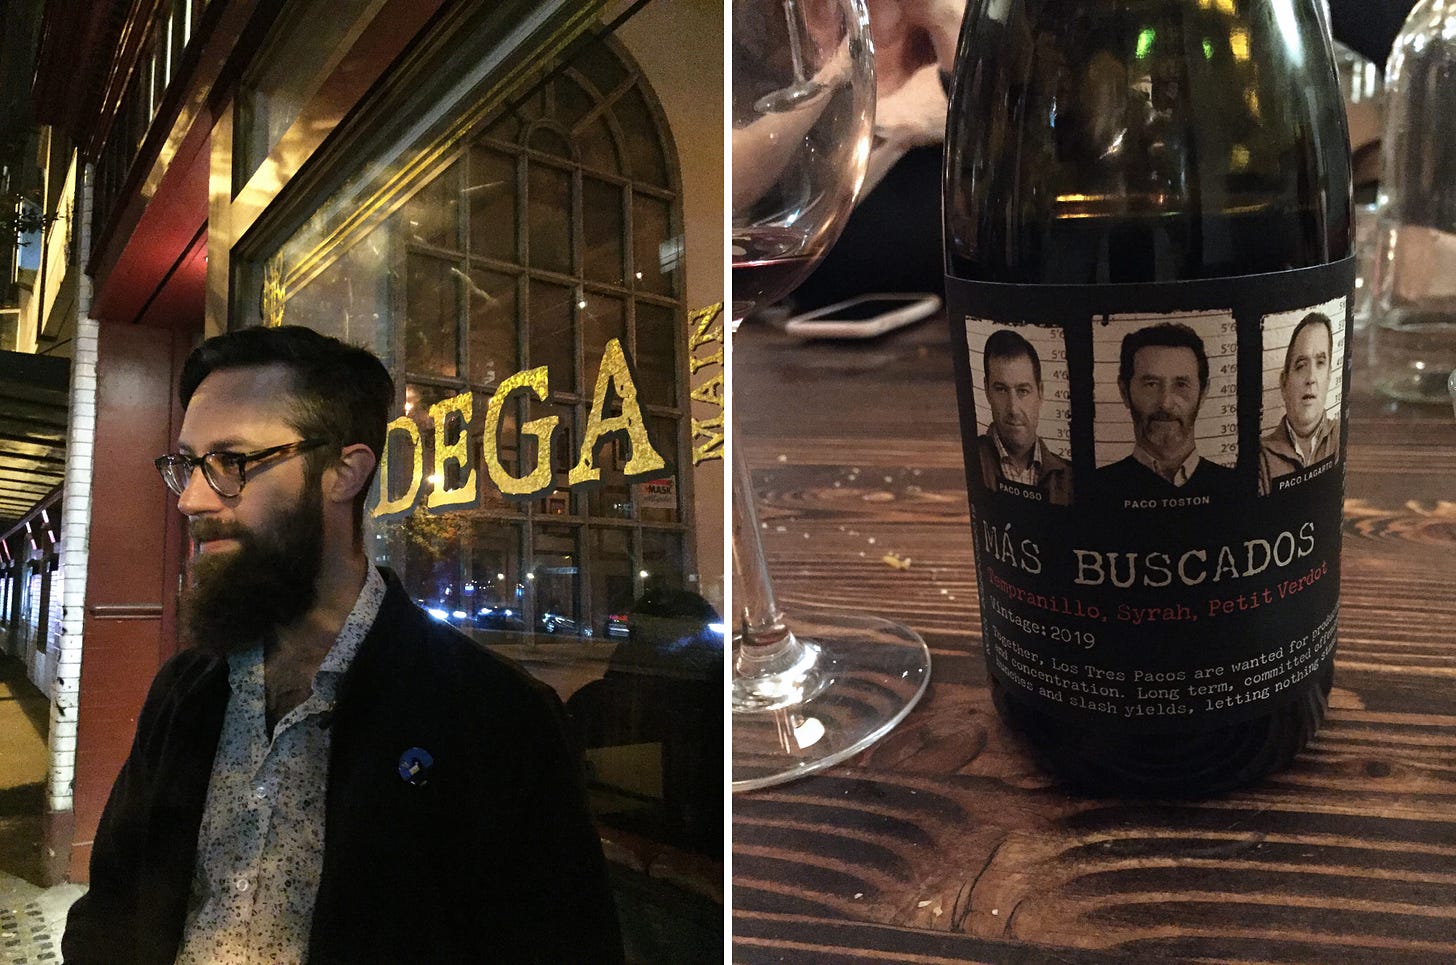 Left image: Jeff stands on the sidewalk in front of the window of Bodega, smiling as he talks to someone out of frame. Half the text of 'BODEGA" is visible in gold writing on the window behind him. Right image: a bottle of wine, "Mas Buscados", with 3 mugshots on the bottle, sits next to a wine glass on a wooden table. Two people are seated behind it on the other side of the table.